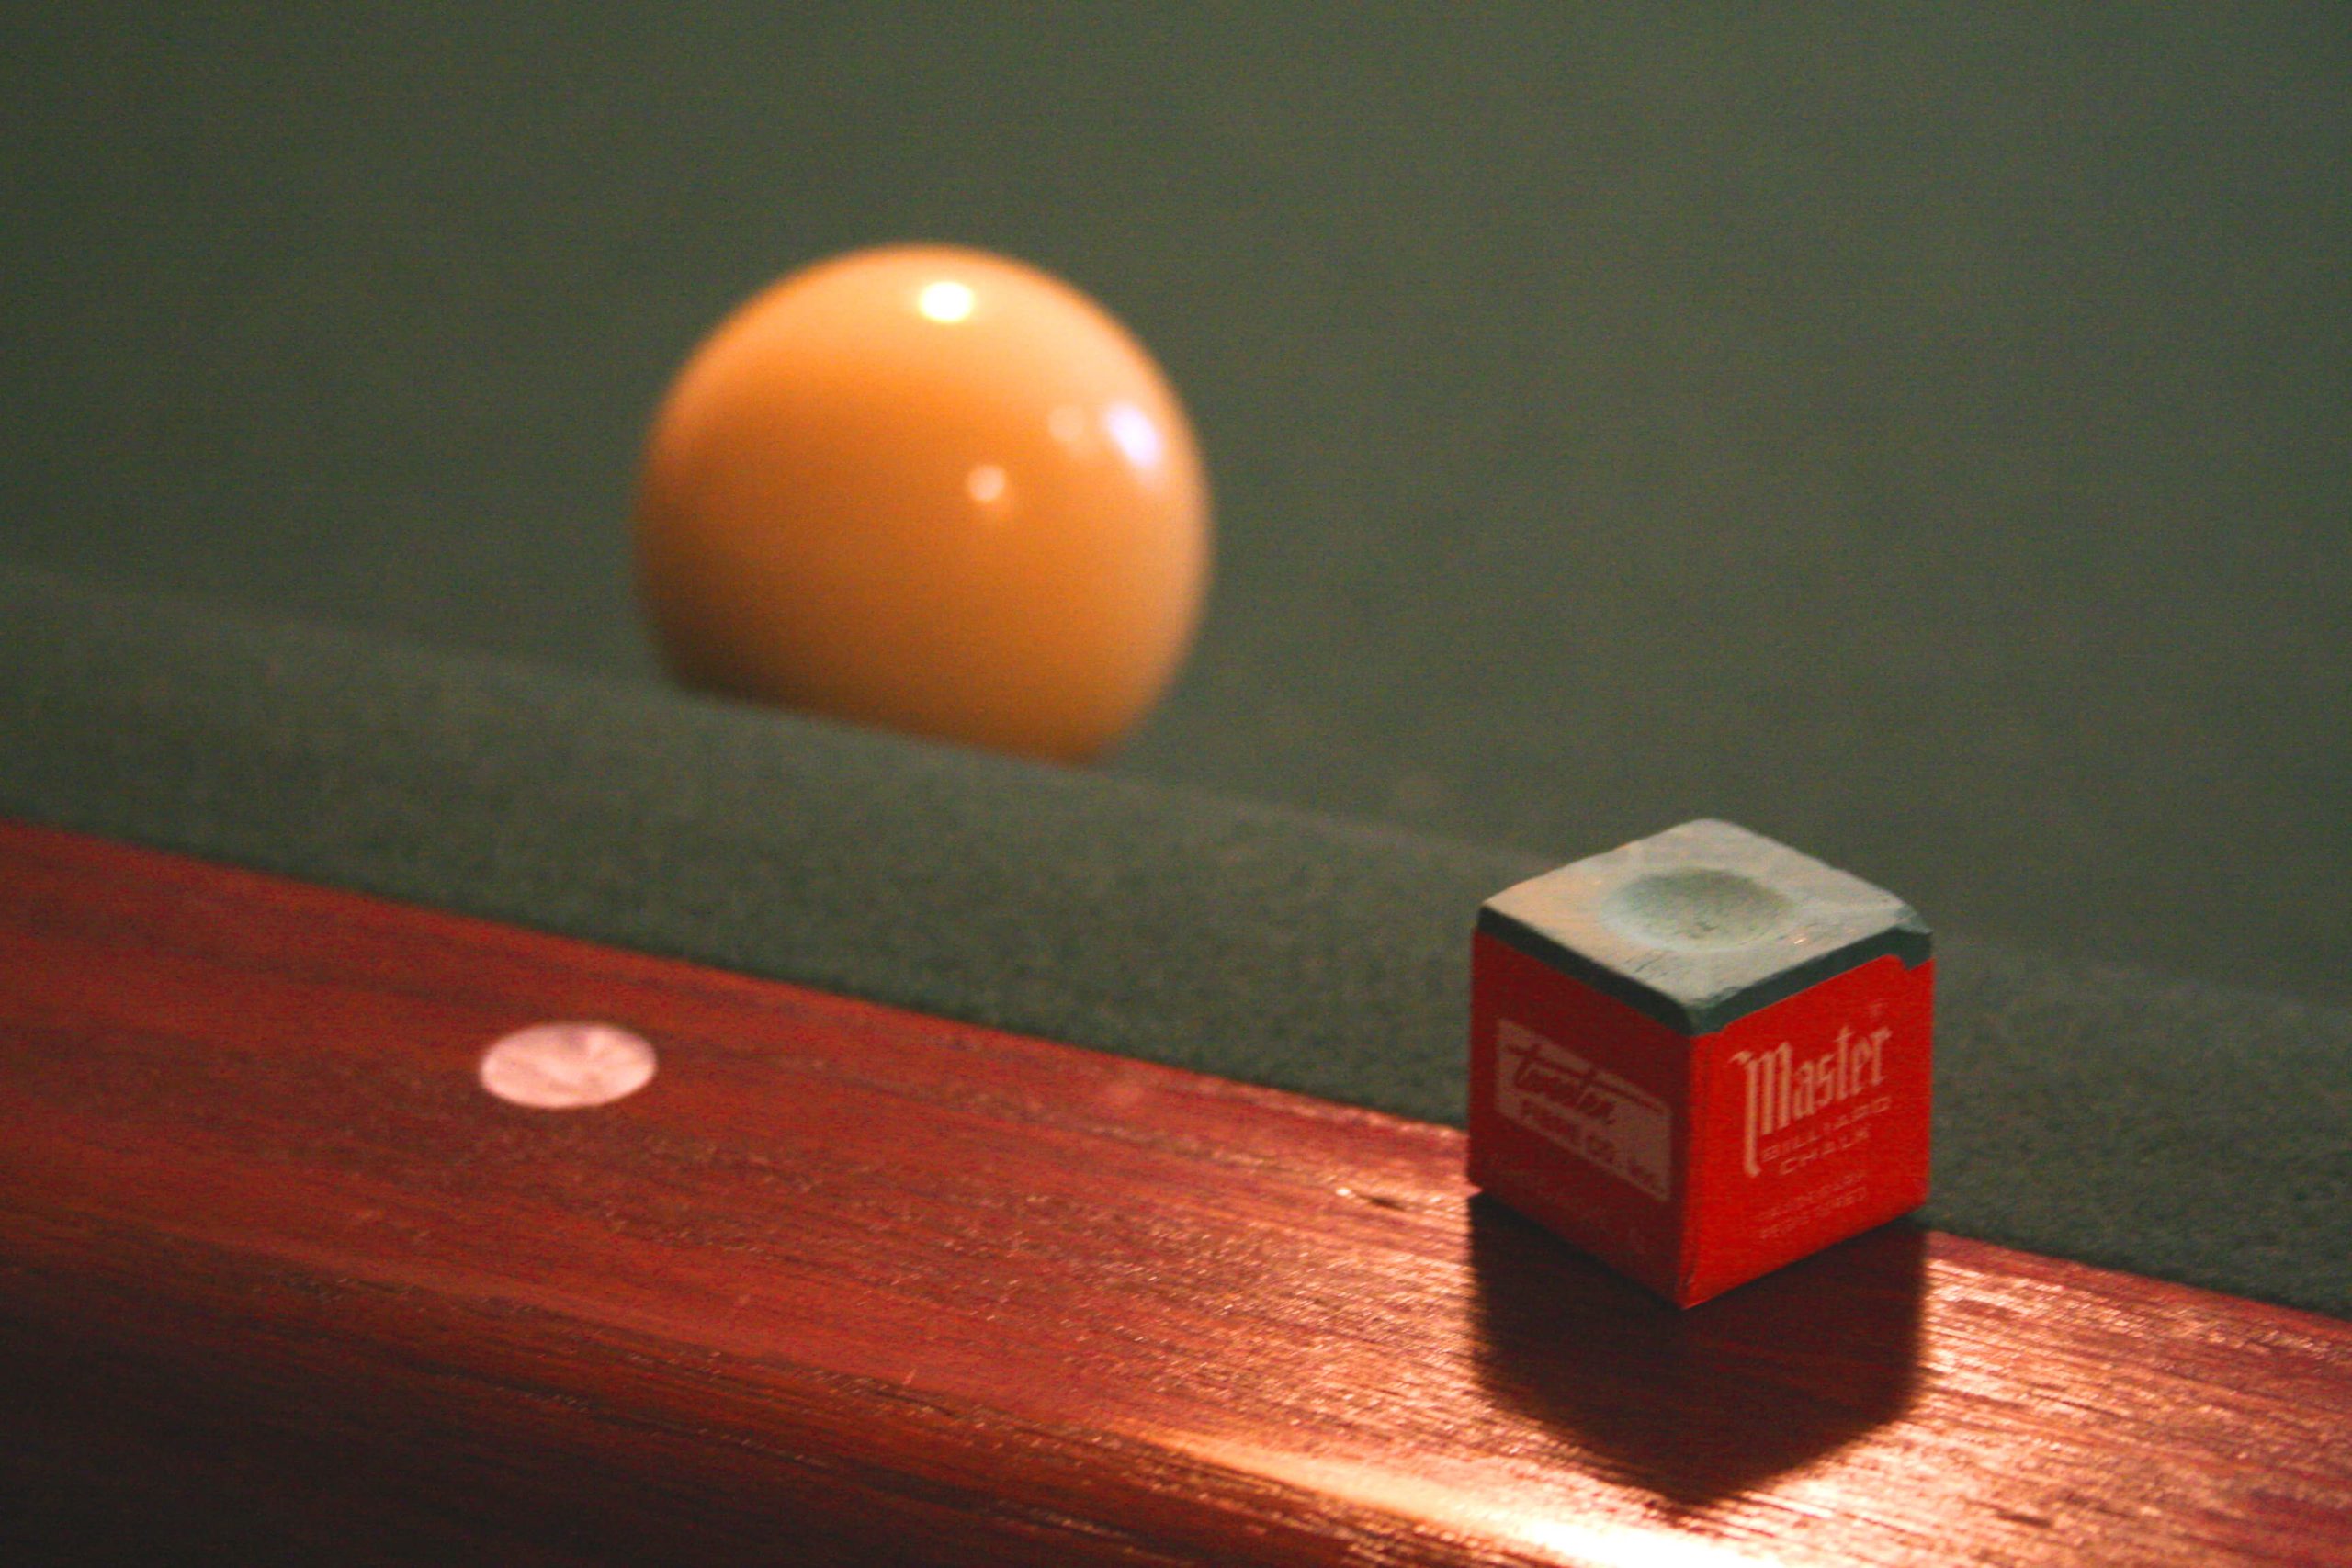 How To Replace A Pool Cue Tip Ferrule